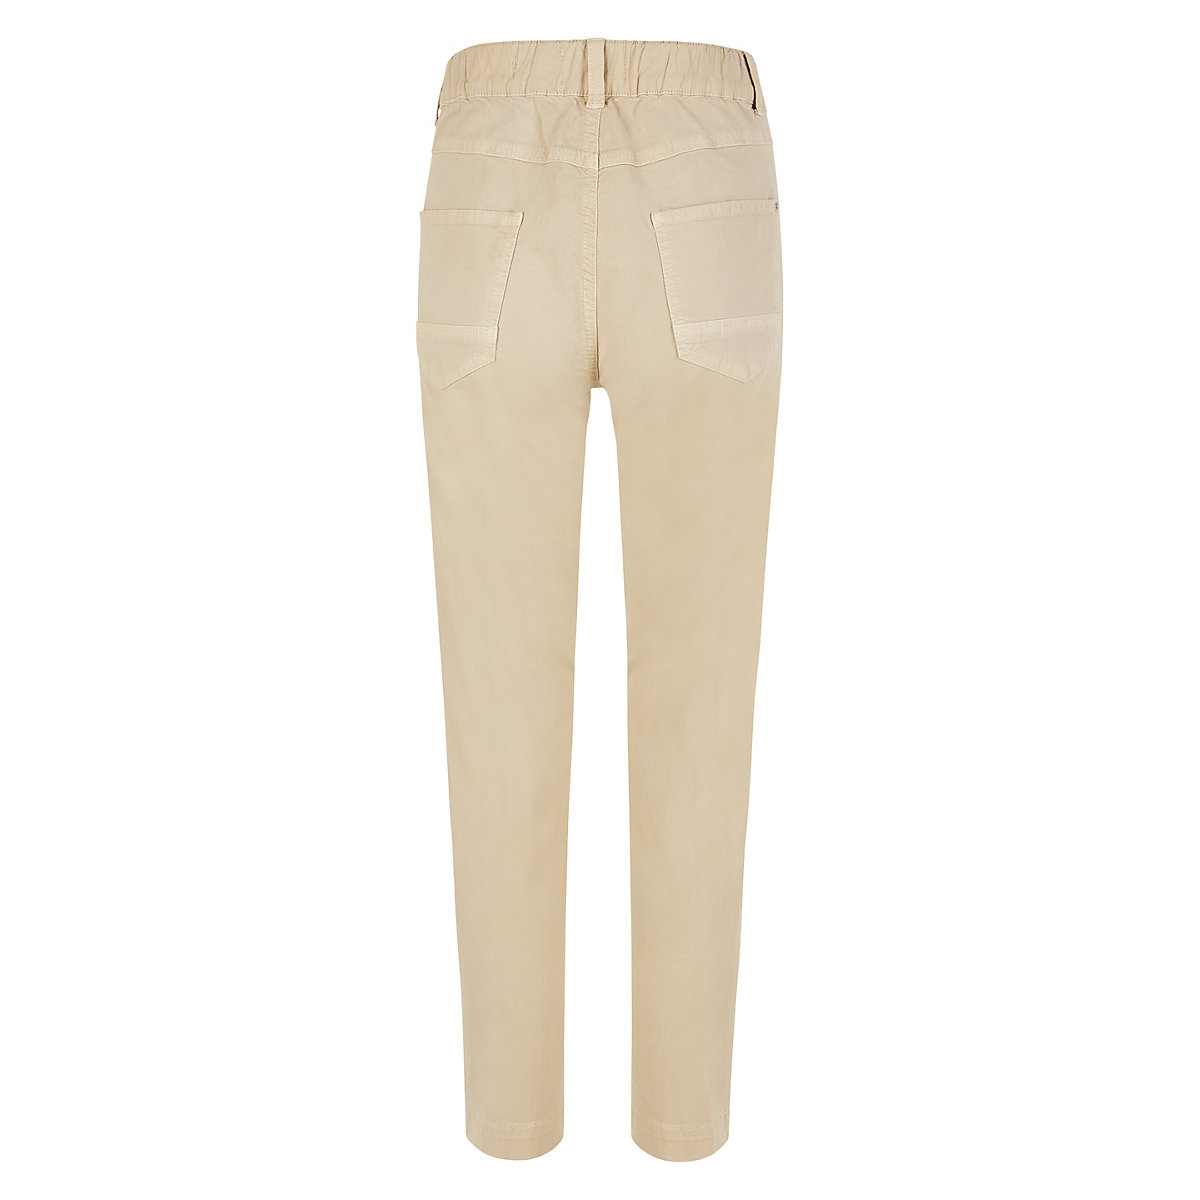 Angels® Ankle-Jeans Tama Cropped sand OY6468